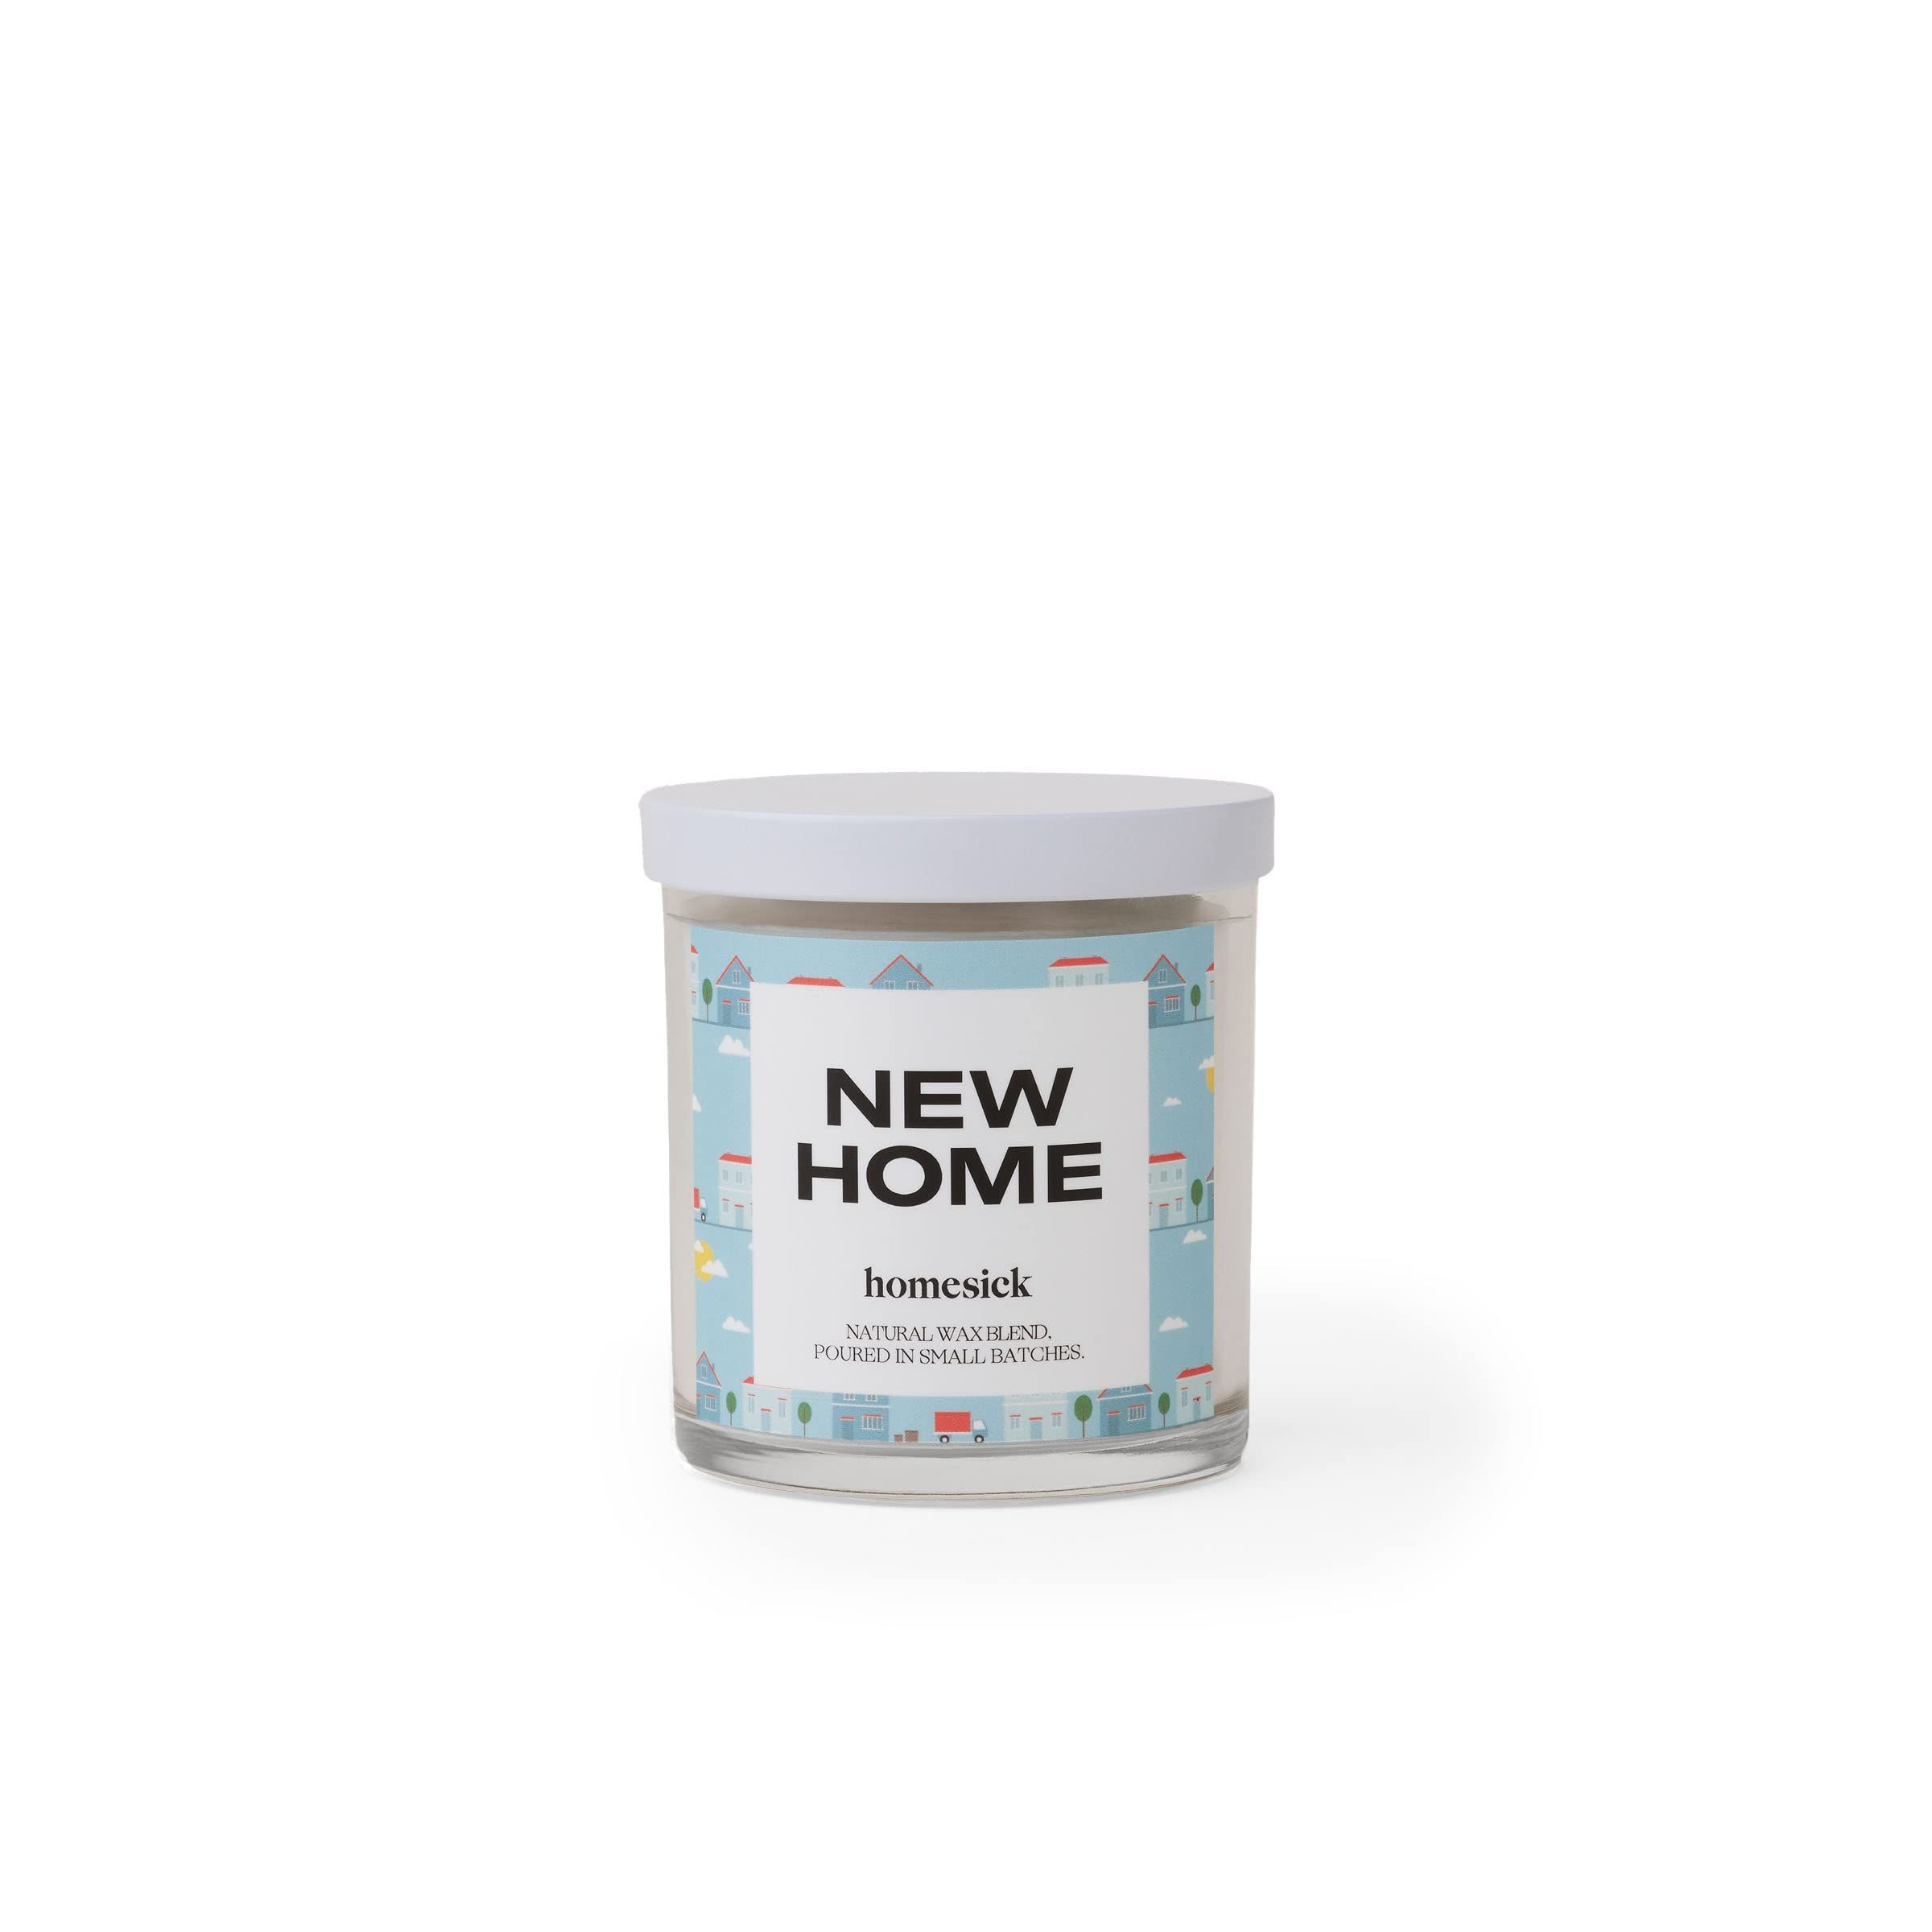 New Home Premium Scented Candle 